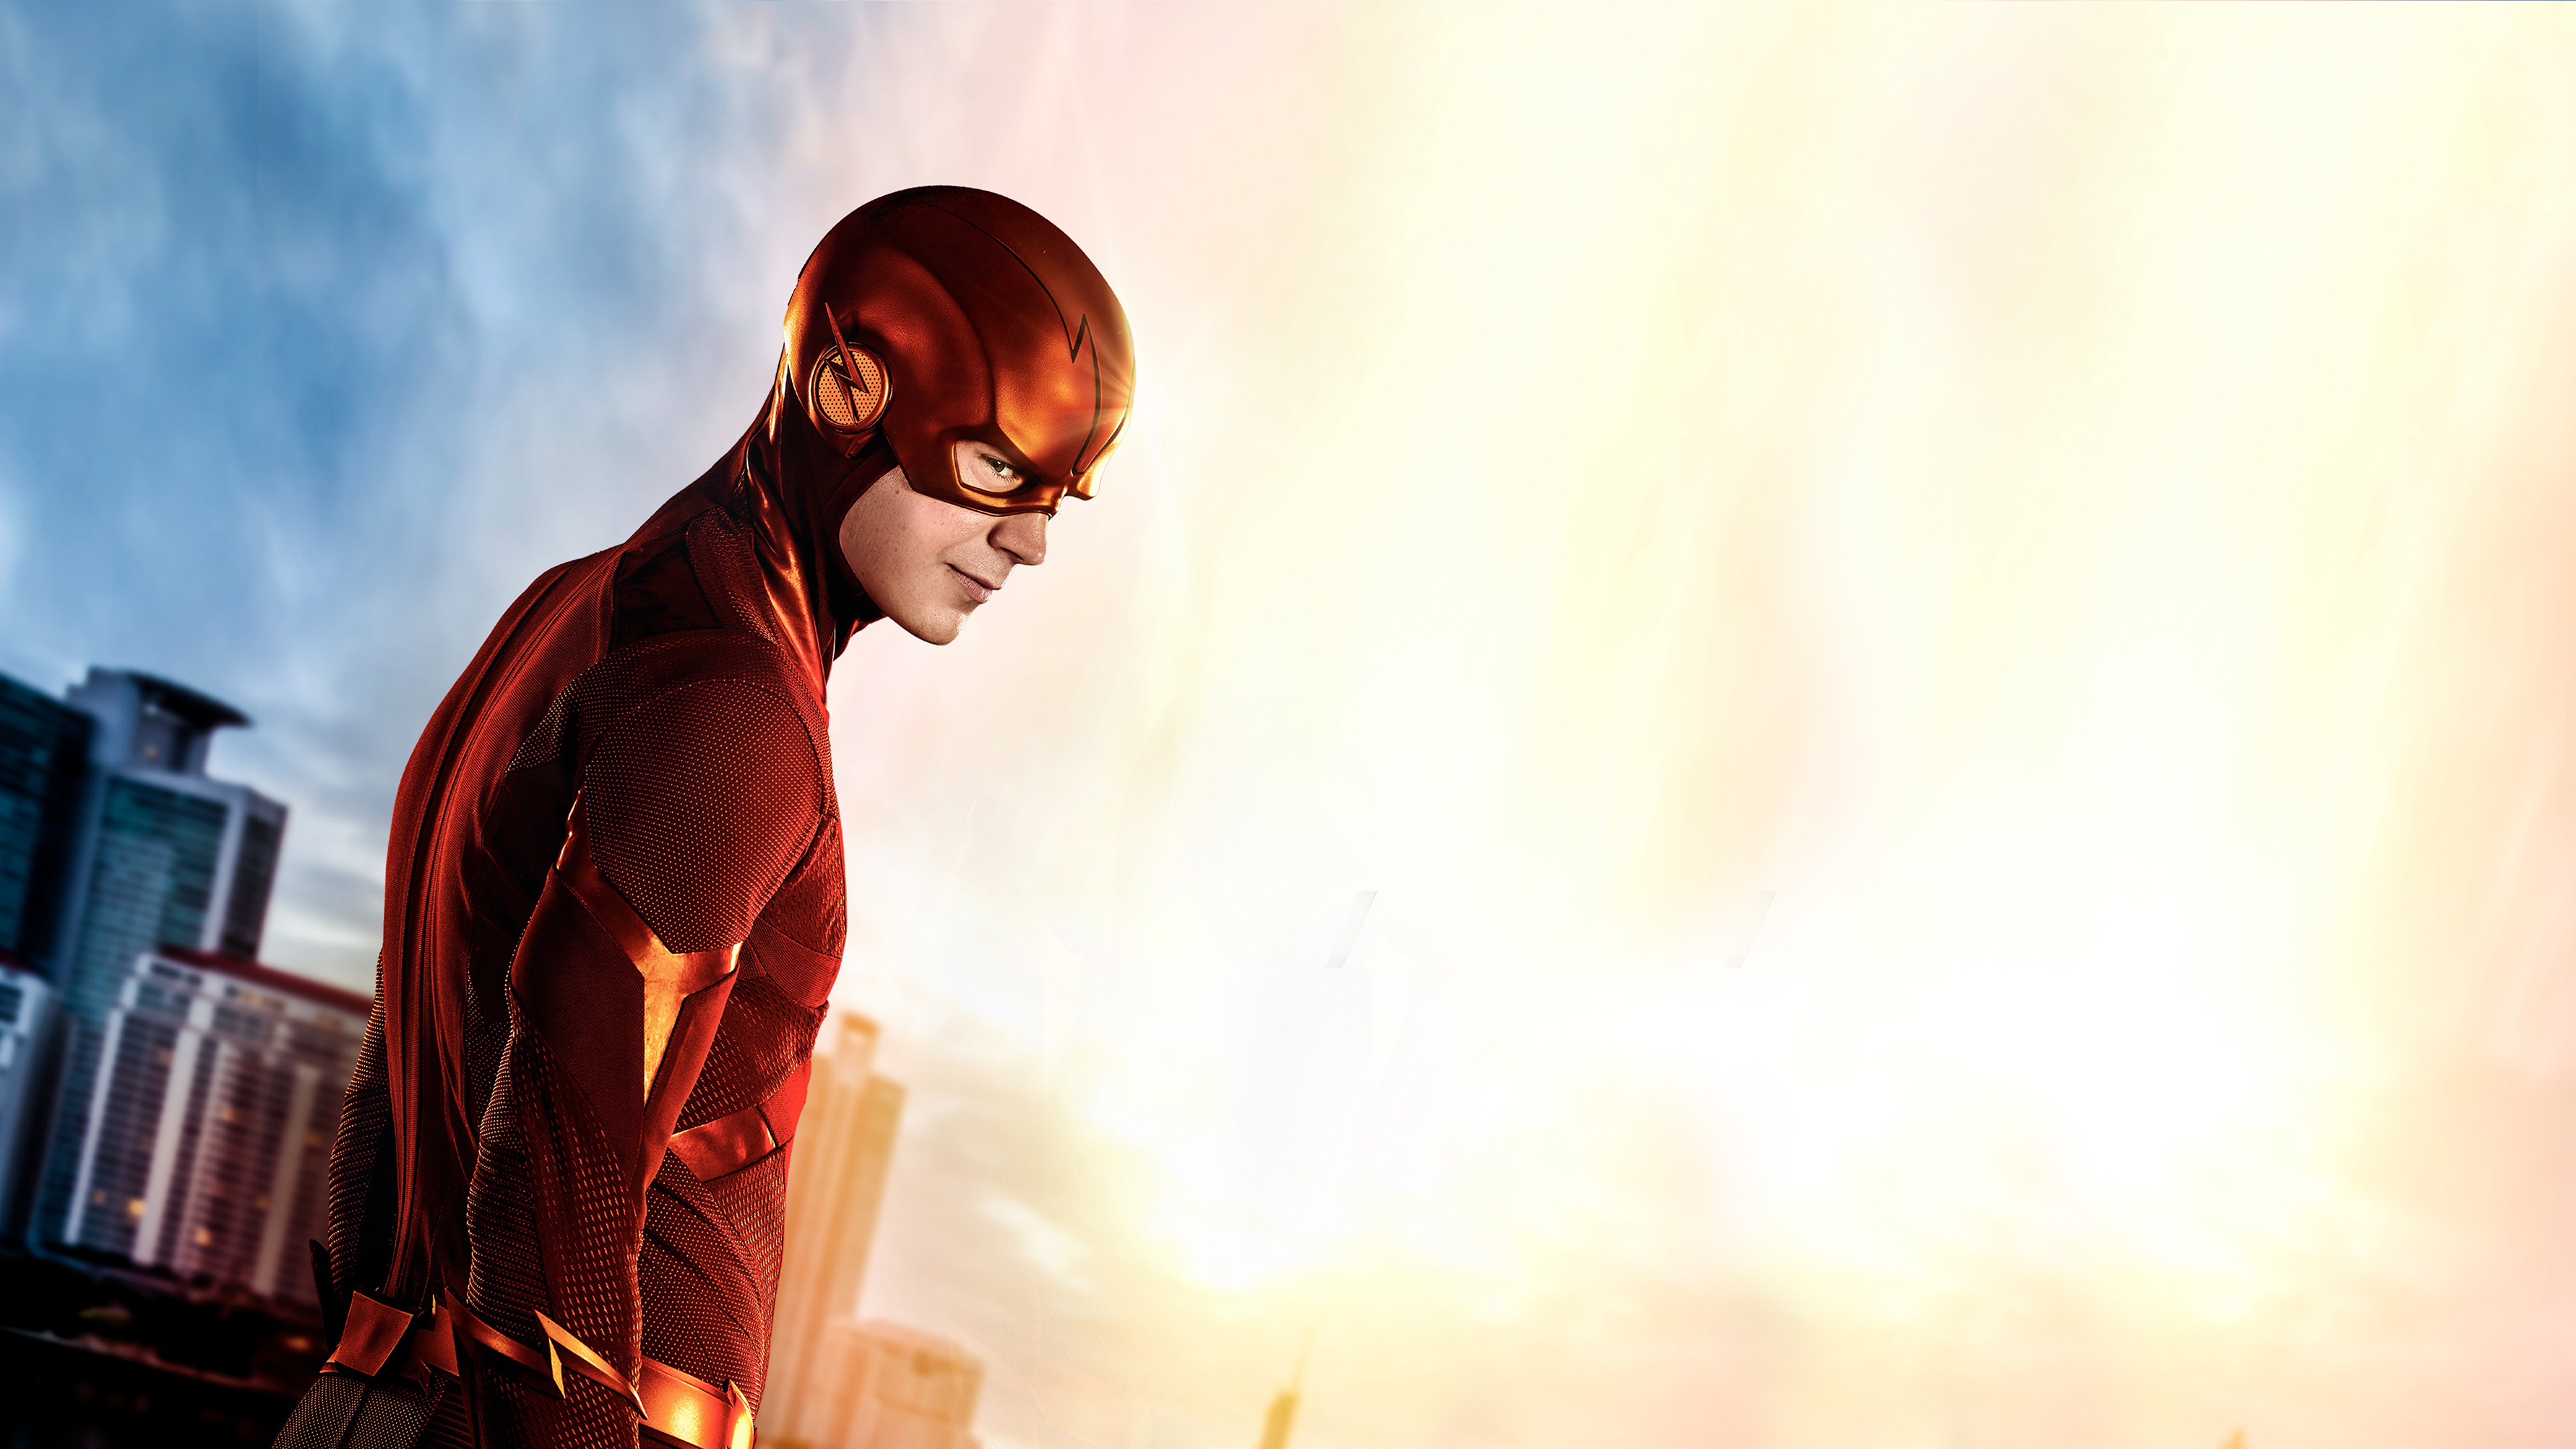 Grant Gustin: An American actor known for his role as Barry Allen - The Flash on the CW series The Flash. 3840x2160 4K Wallpaper.